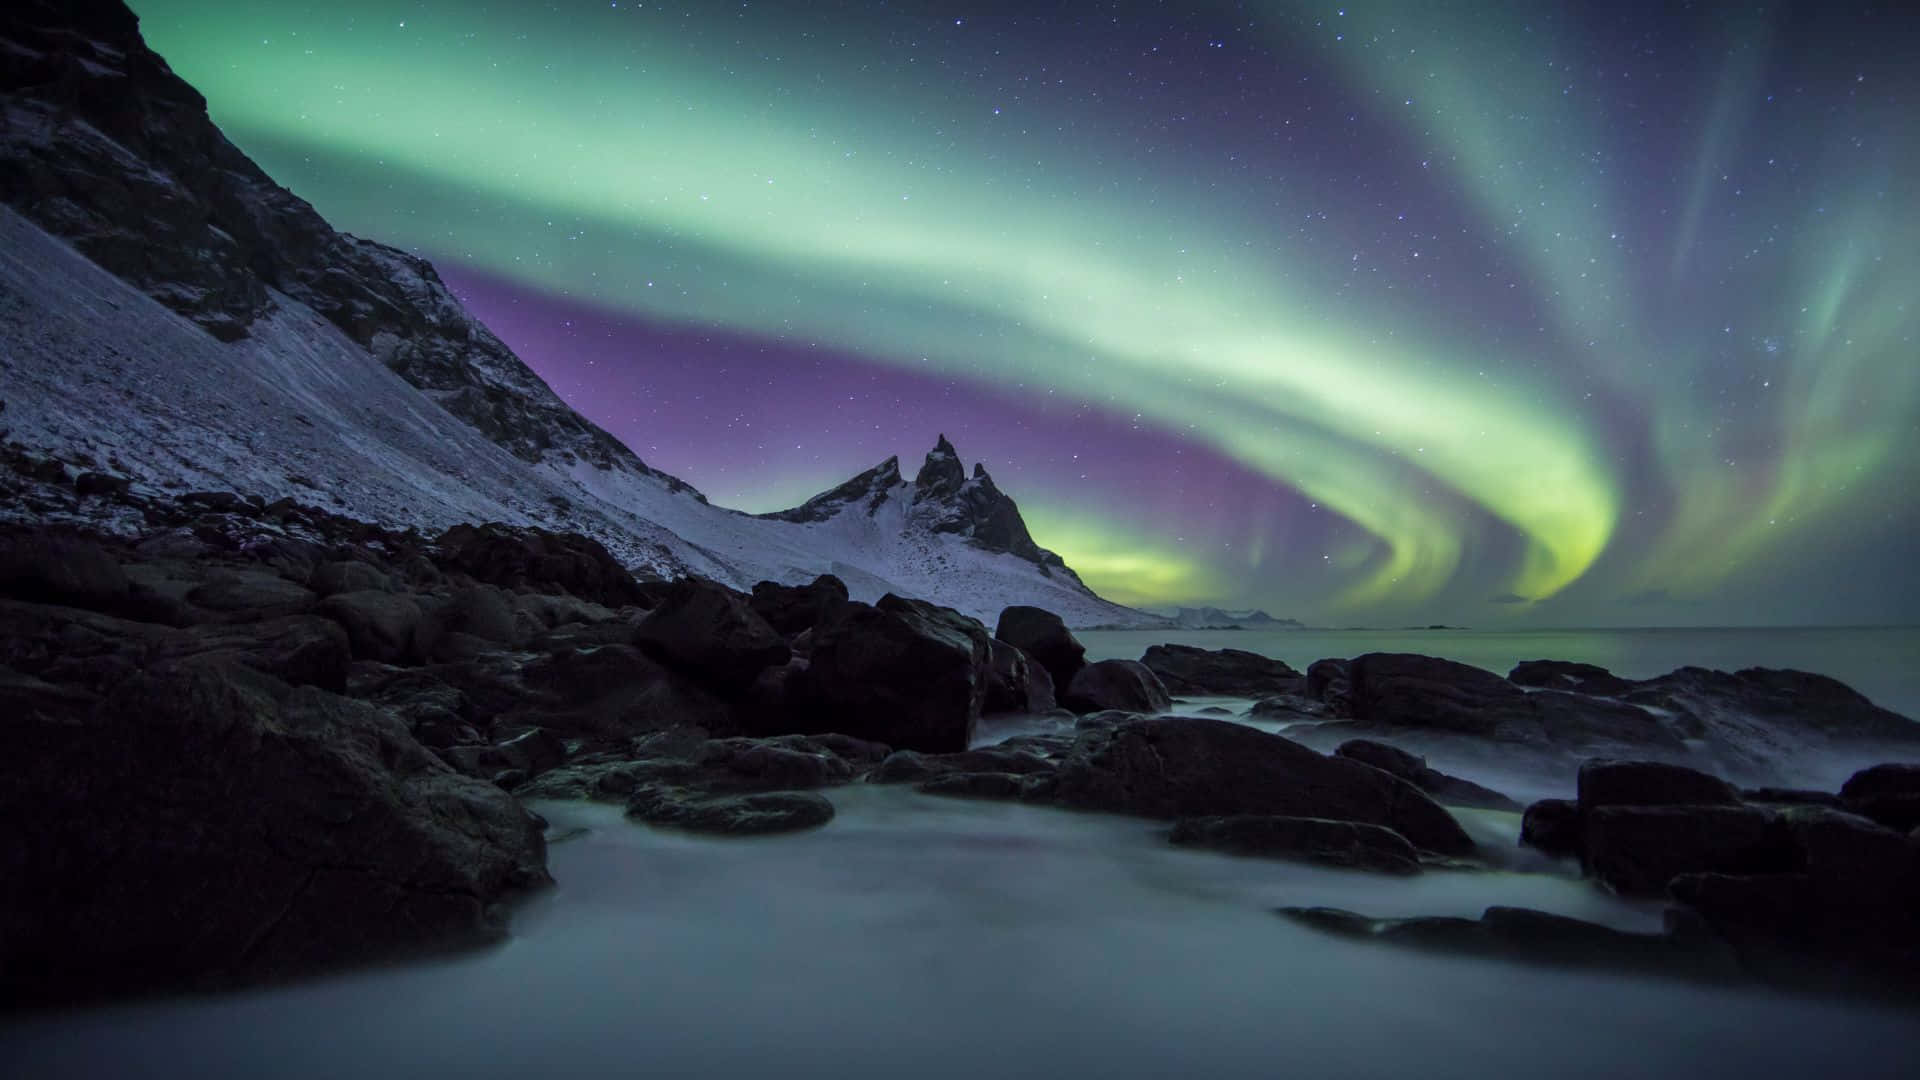 Take in the stunning beauty of nature with the majestic Northern Lights.